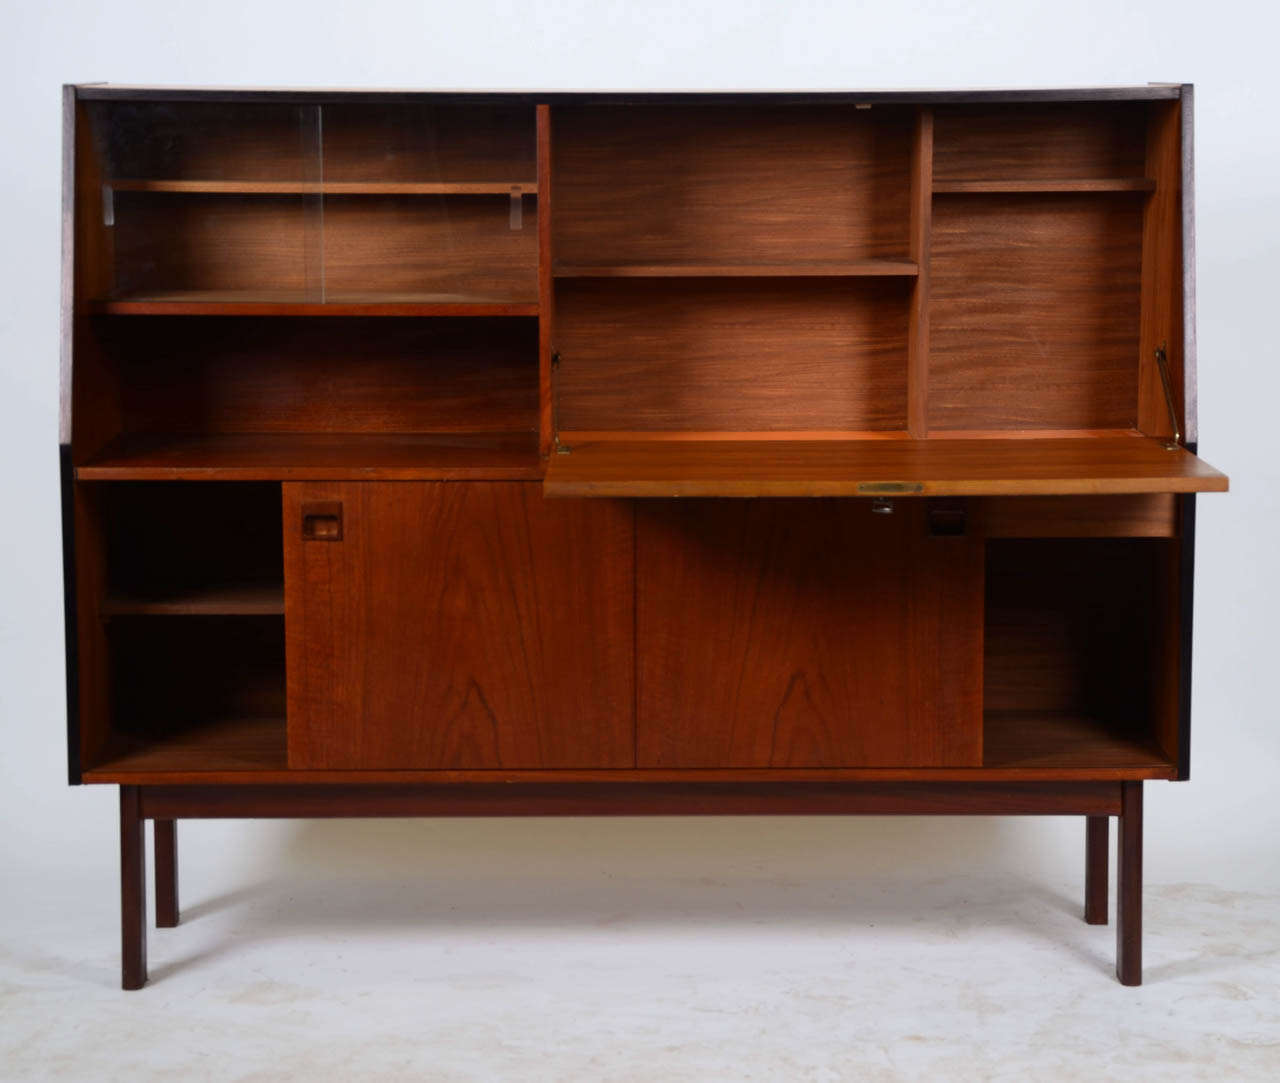 British Teak Sideboard with Colored And Graphic Veneer